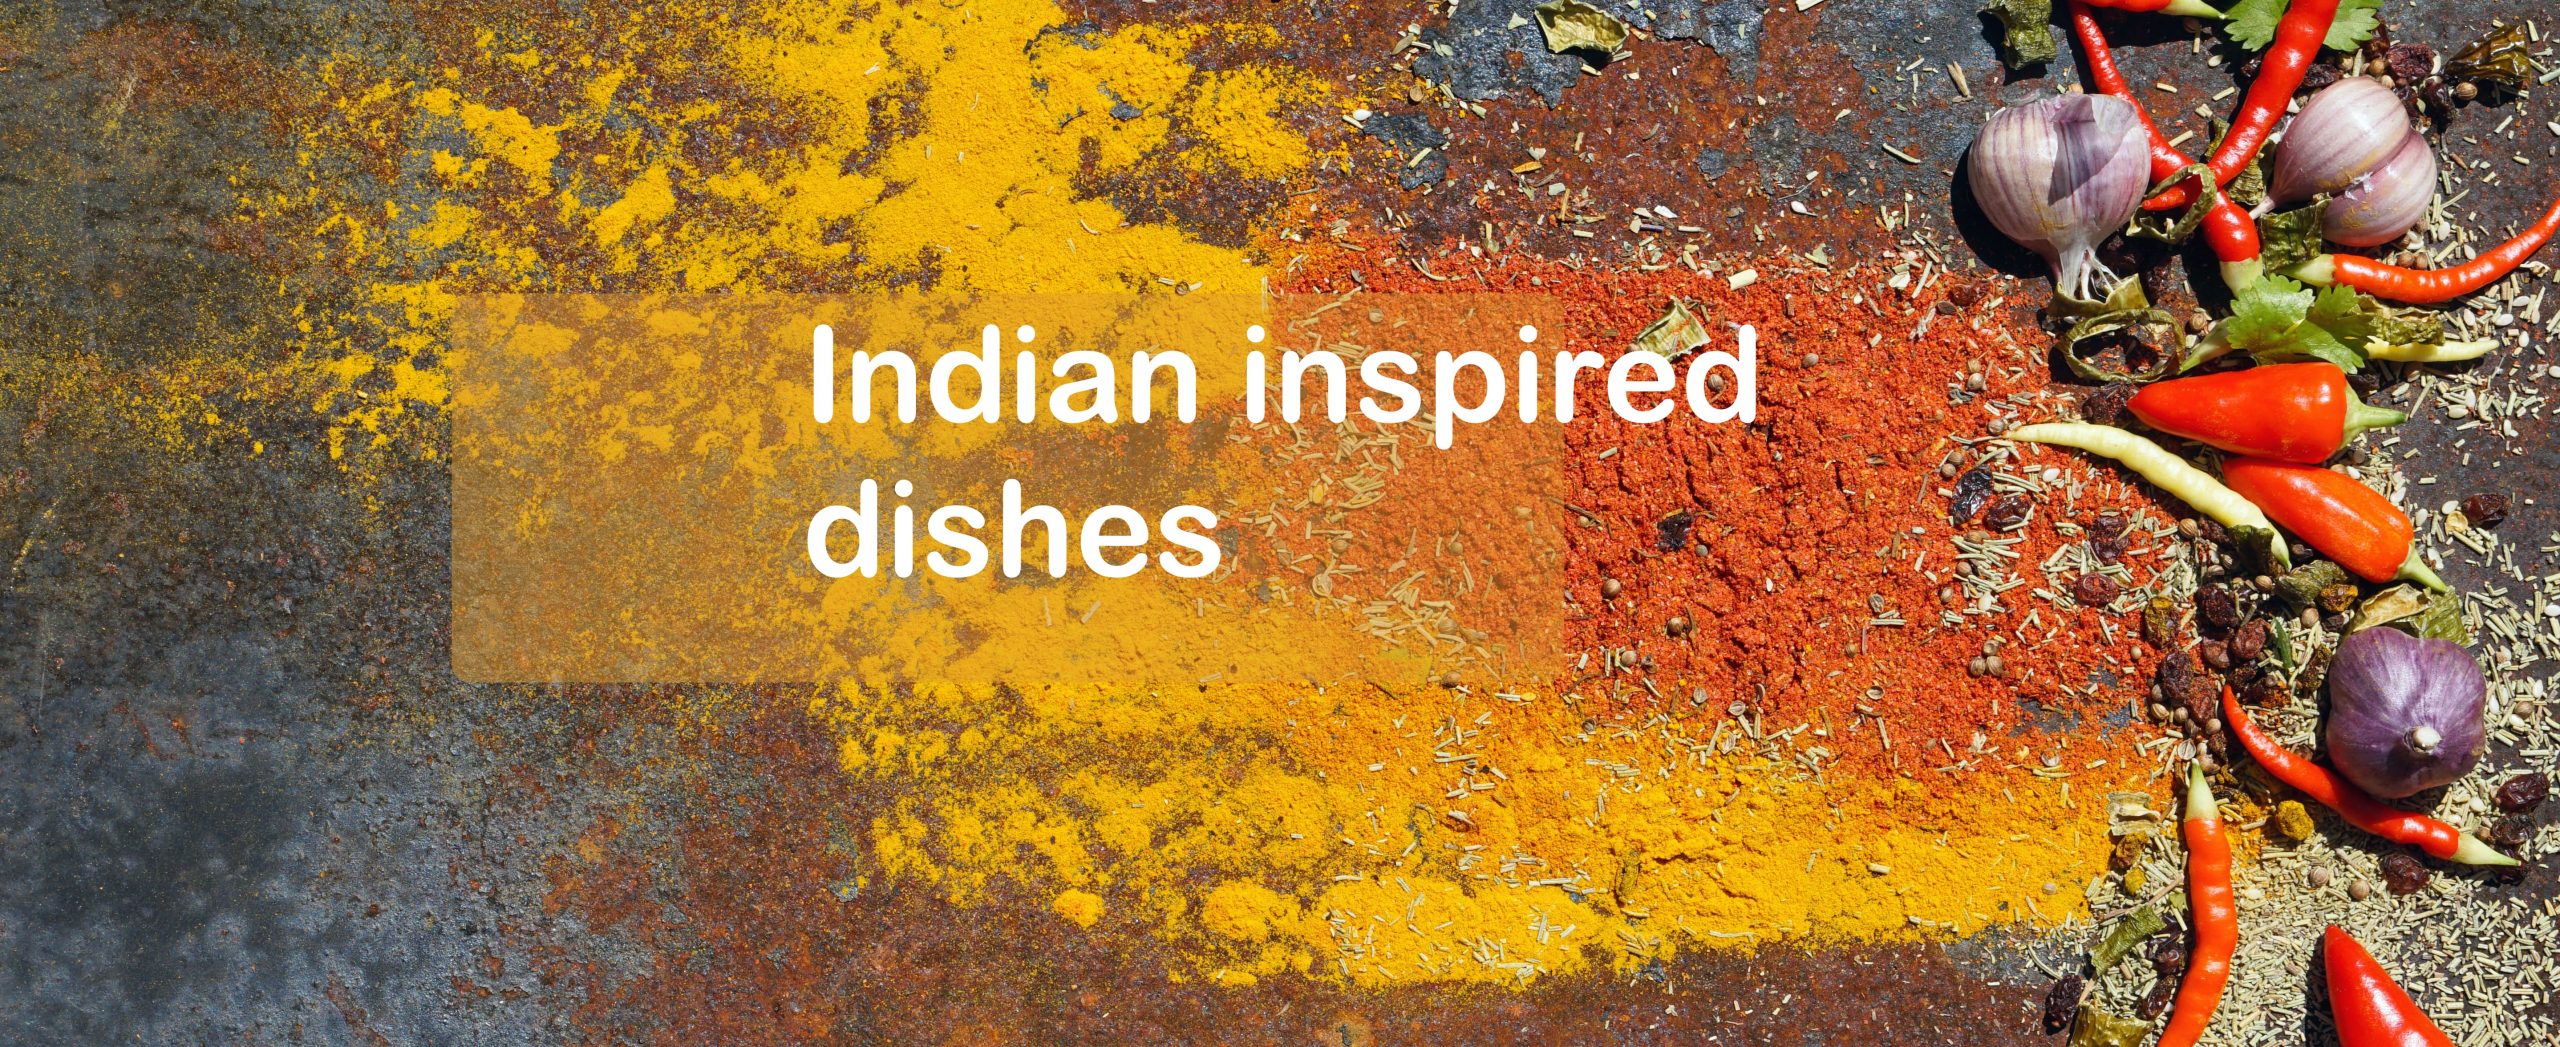 Indian inspired recipes